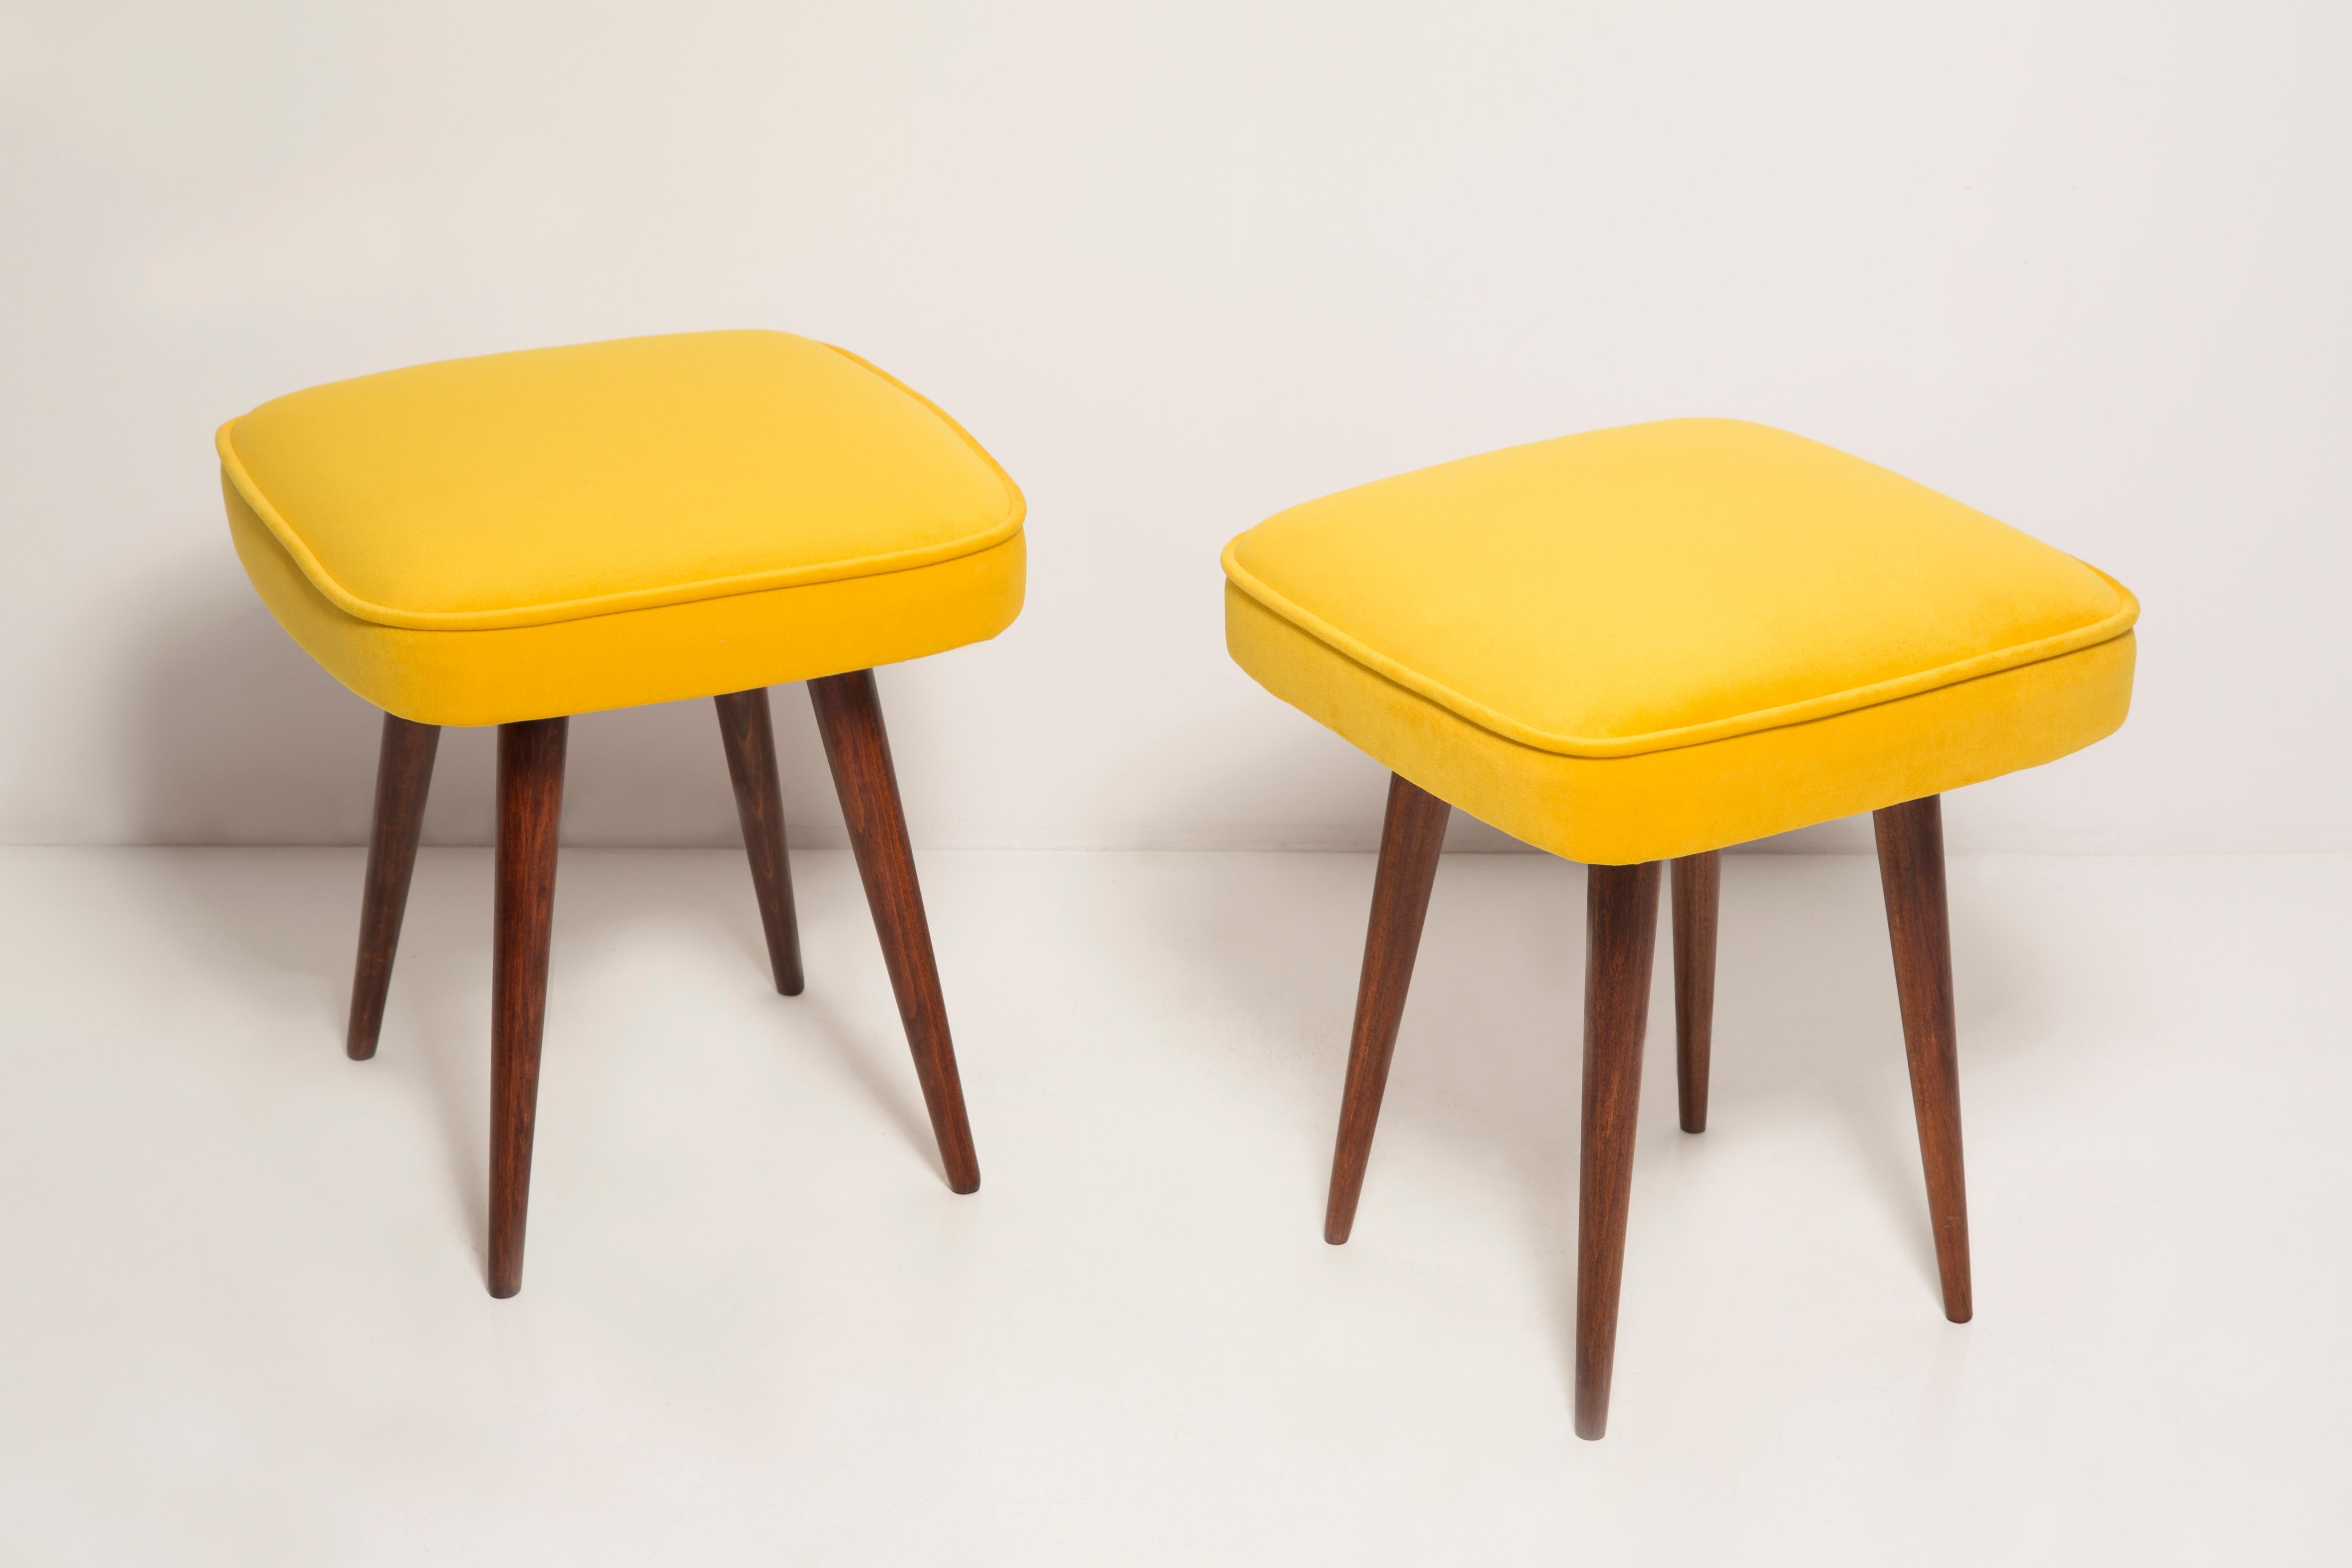 Set of Two Mid-Century Yellow Velvet Foot Stools, Europe, 1960s For Sale 2